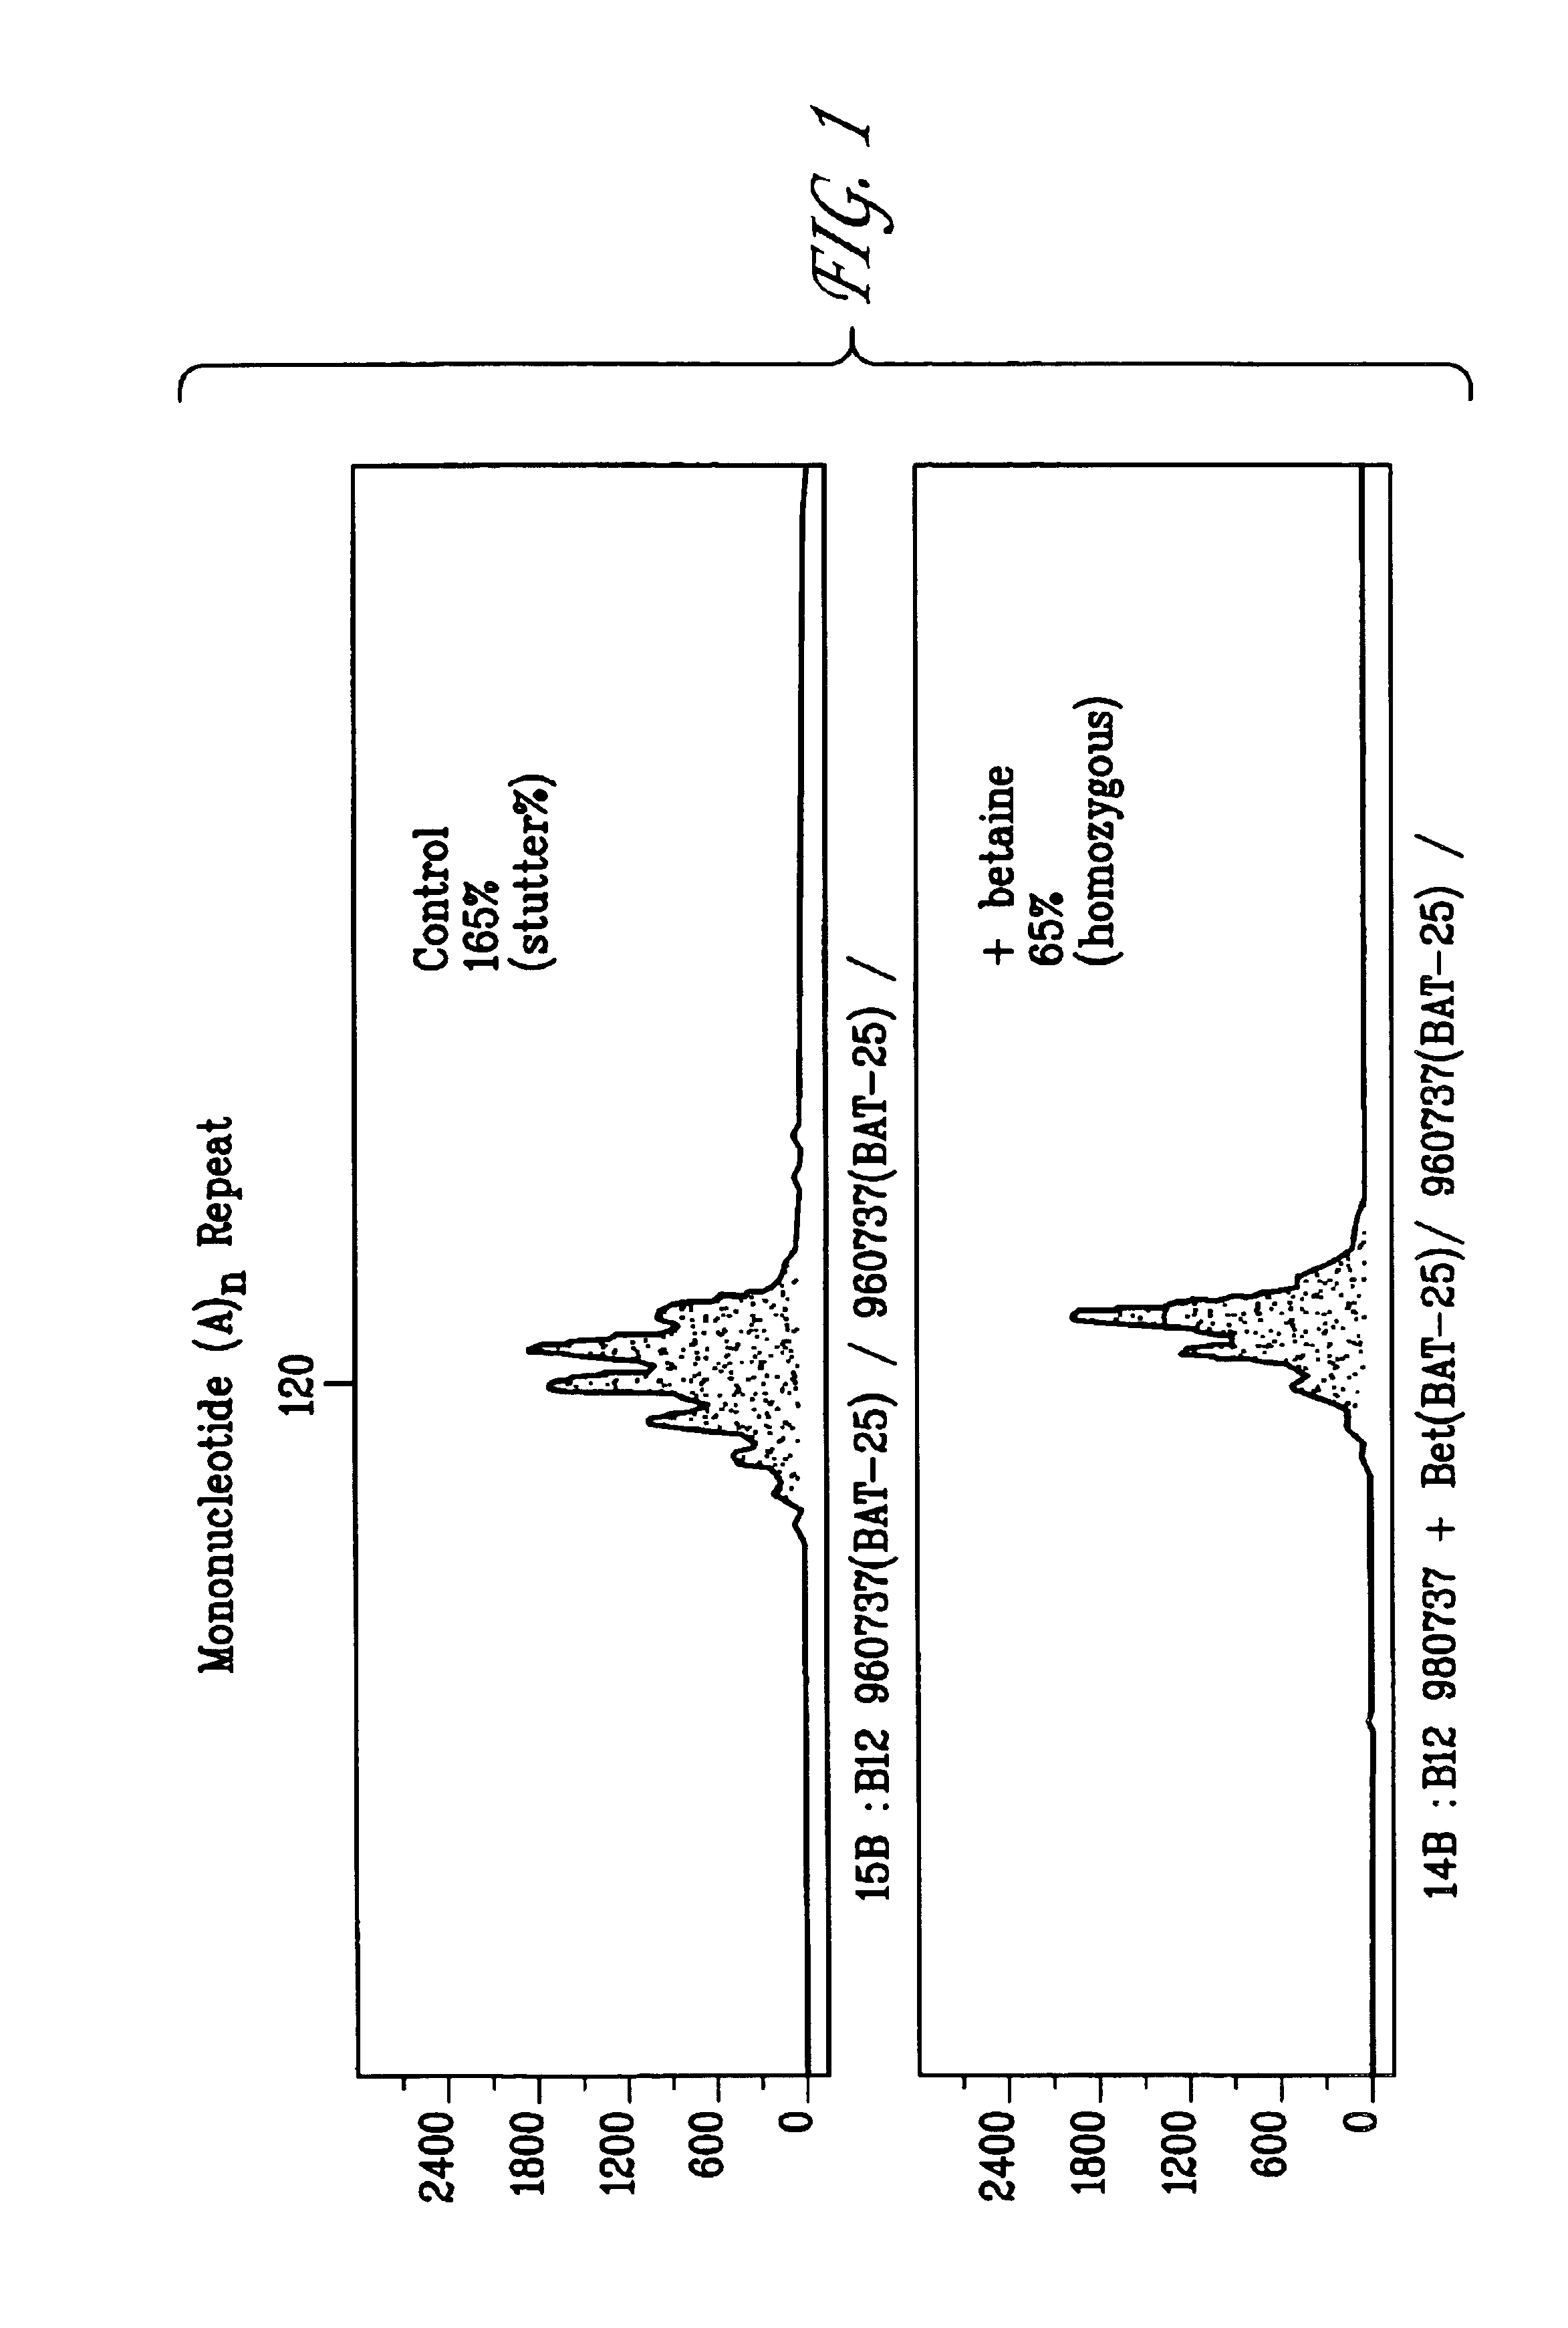 Methods for the reduction of stutter in microsatellite amplification